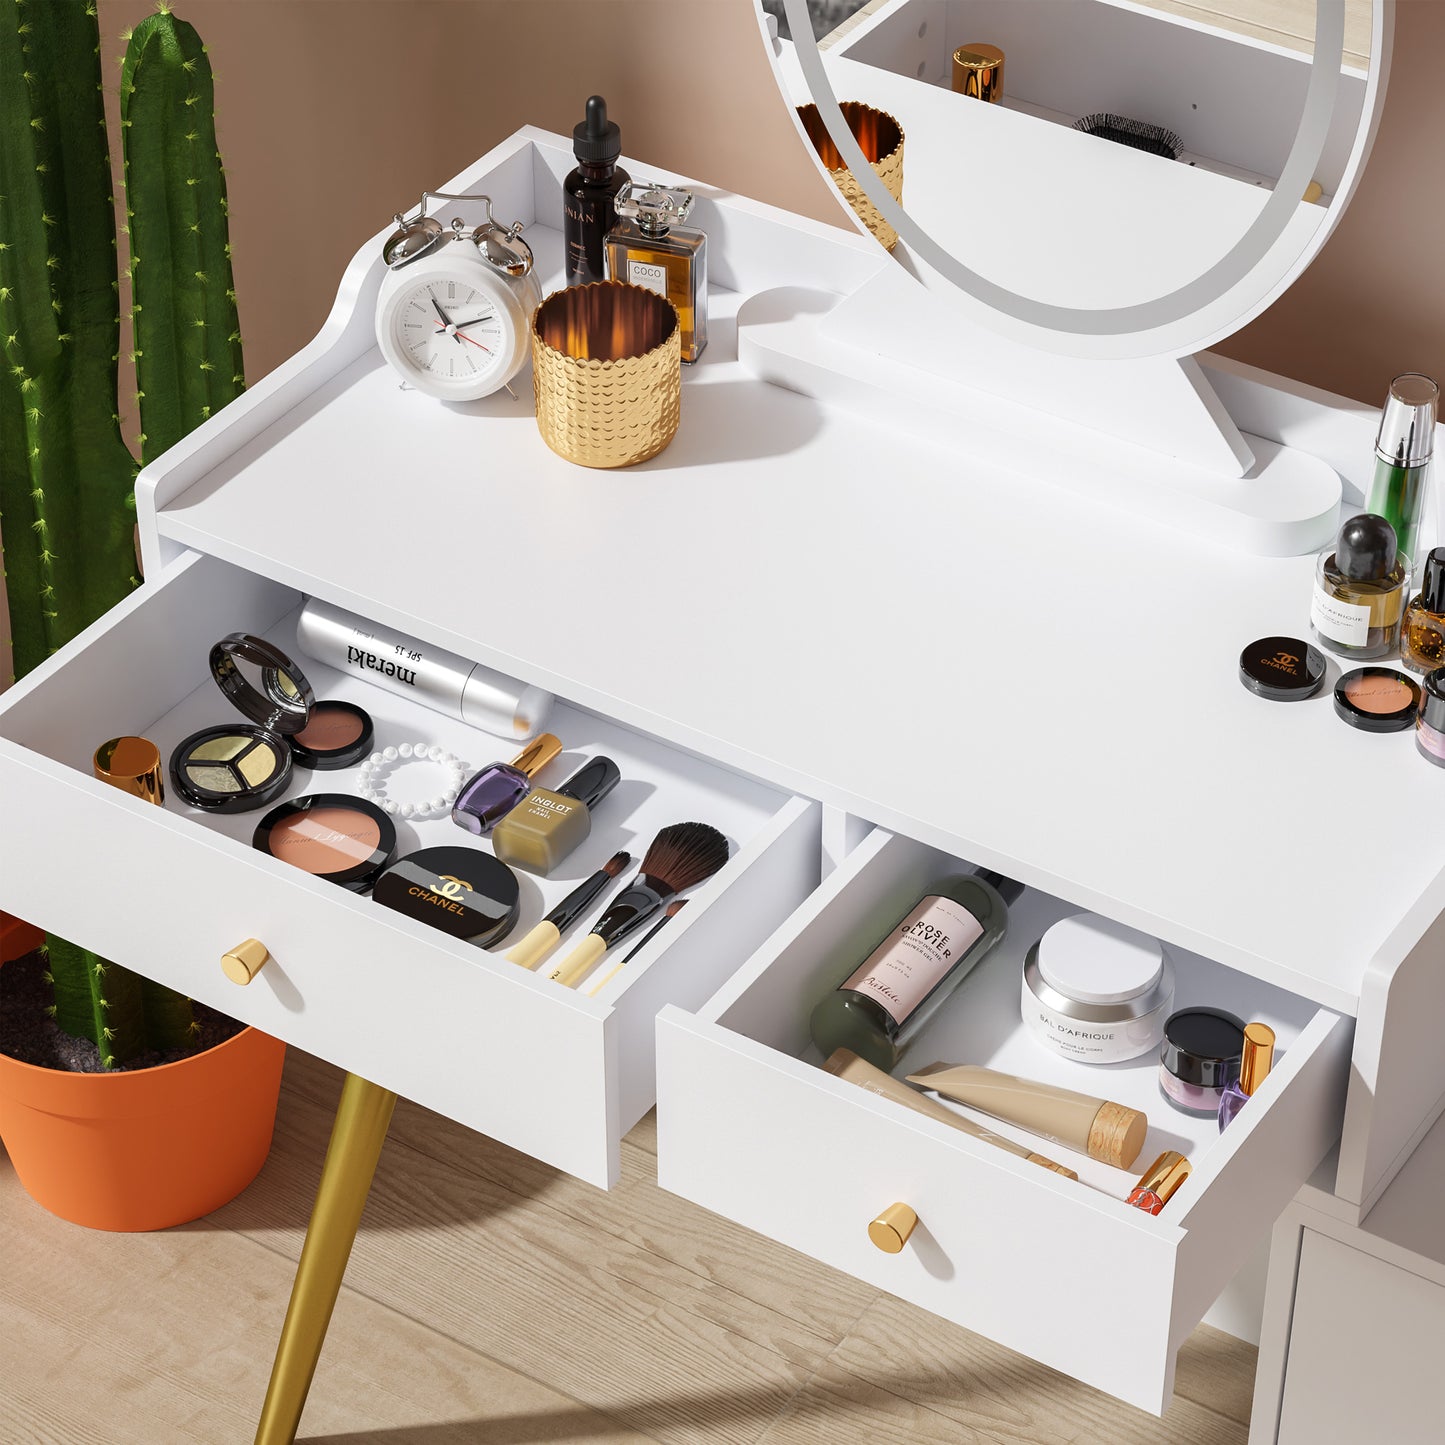 White Vanity Desk with Lighted Mirror, Makeup Vanity Table with Drawers and Adjustable Cabinet, Dressing Table Without Chair for Makeup Room, Bedroom